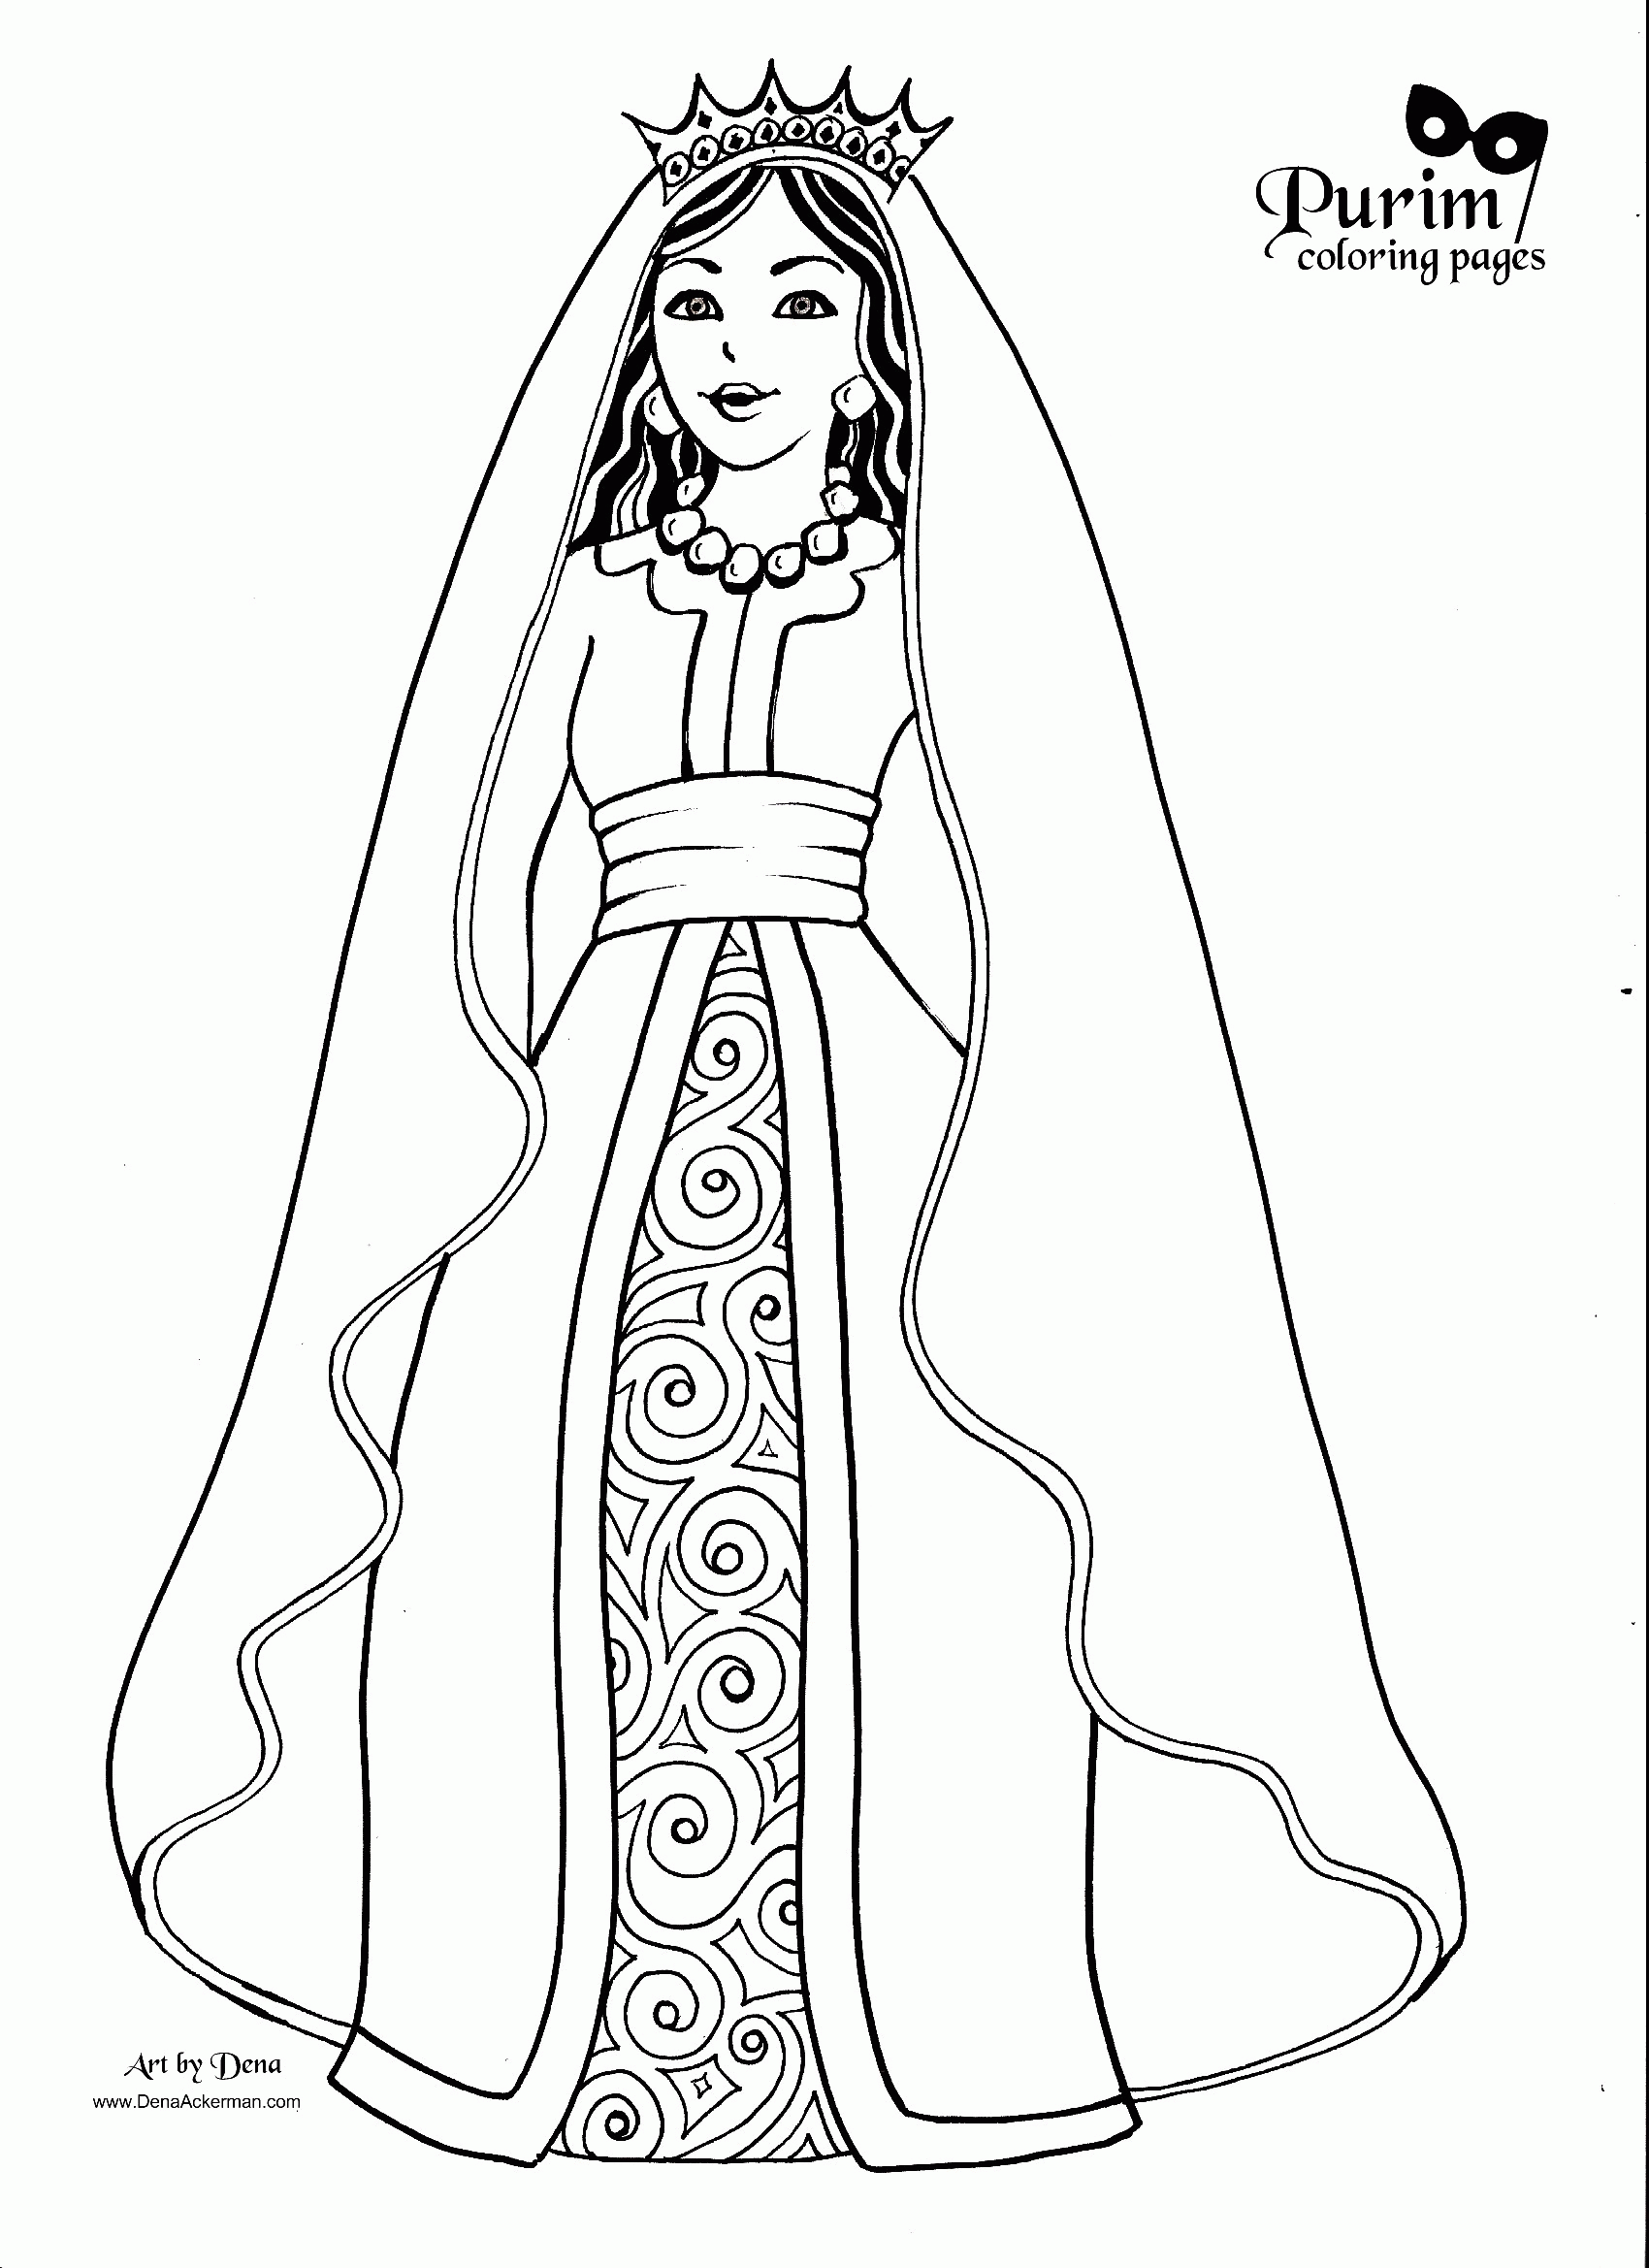 Queen Coloring Page   High Quality Coloring Pages   Coloring Home